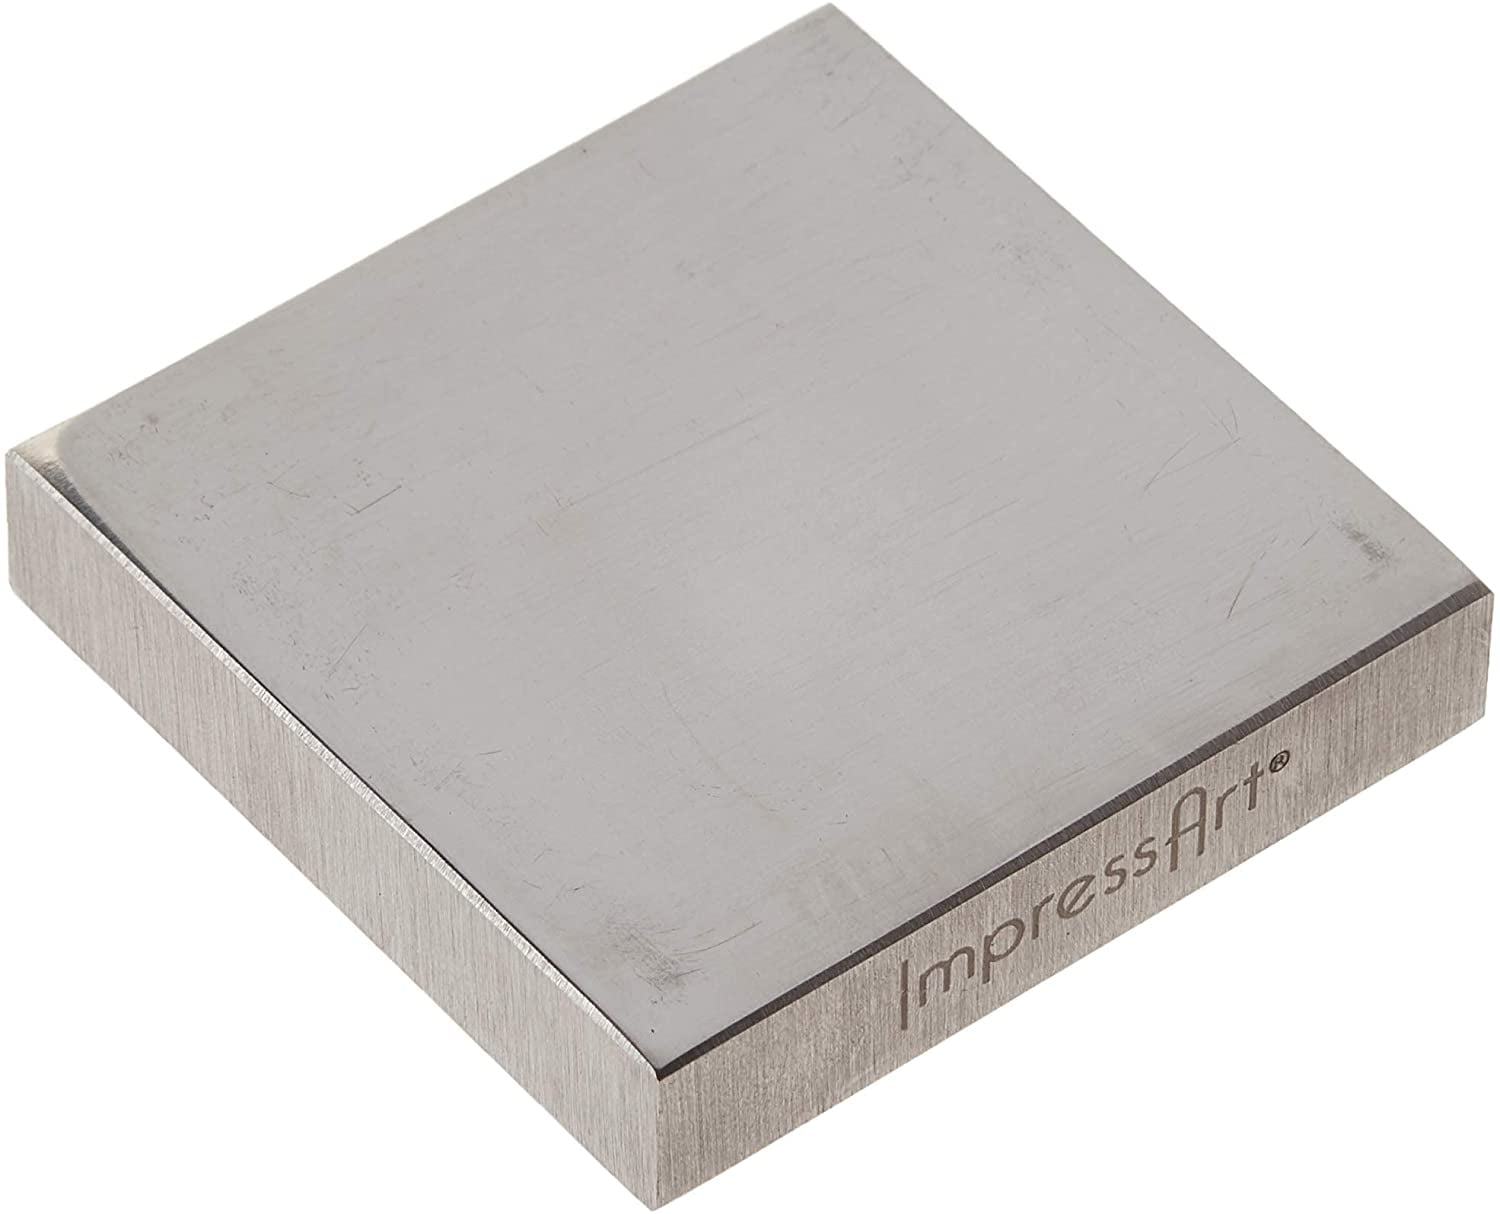 ImpressArt - Solid Steel Bench Block with Rubber Feet, 2 x 2-inch